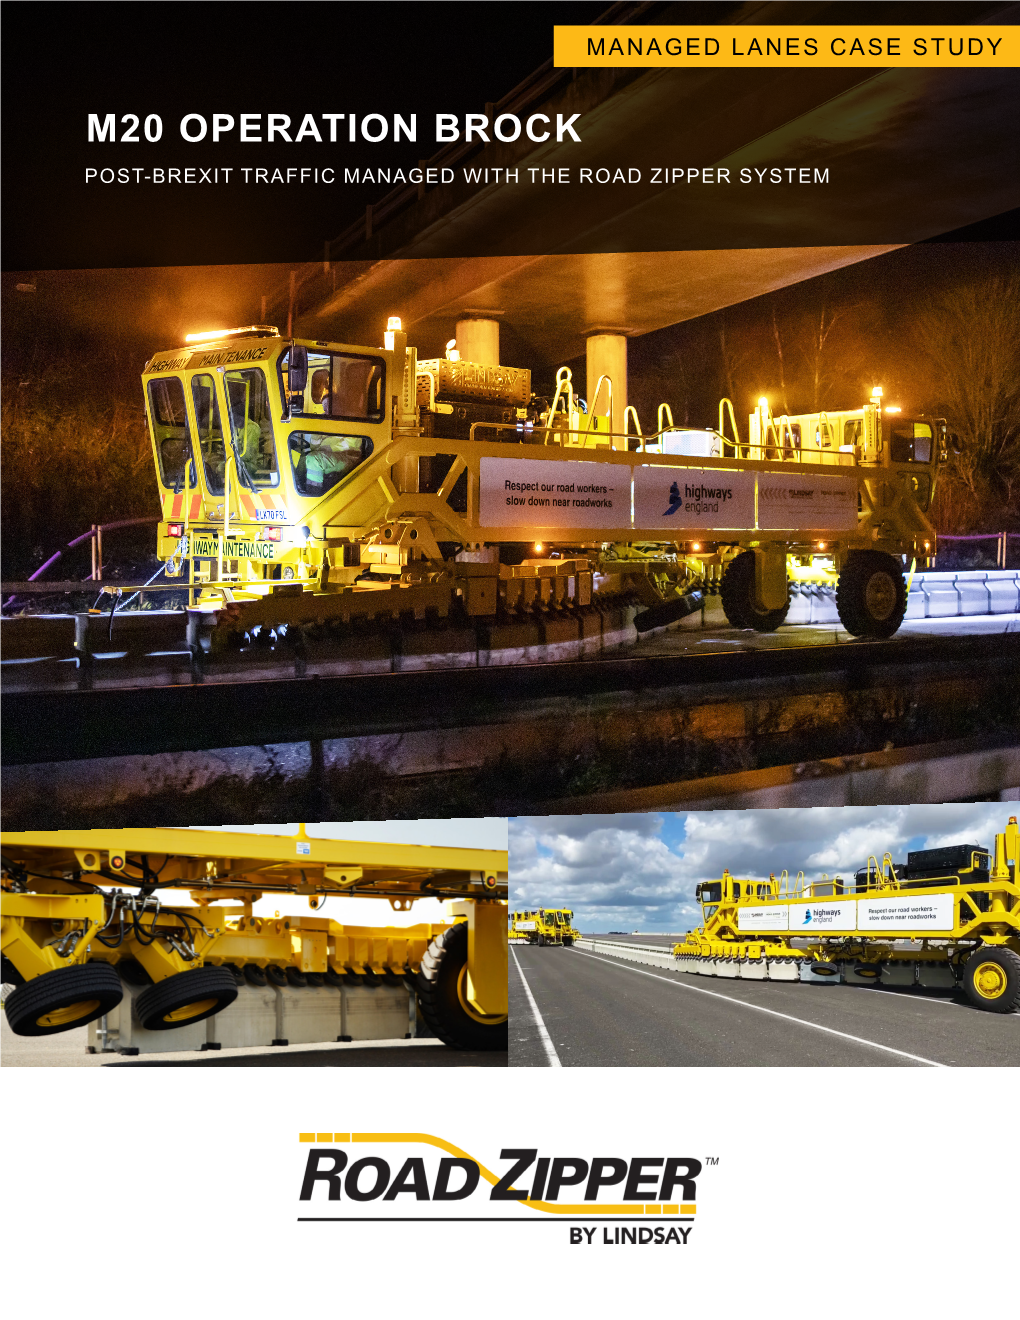 M20 Operation Brock Post-Brexit Traffic Managed with the Road Zipper System M20 Operation Brock | Case Study for Managed Lanes